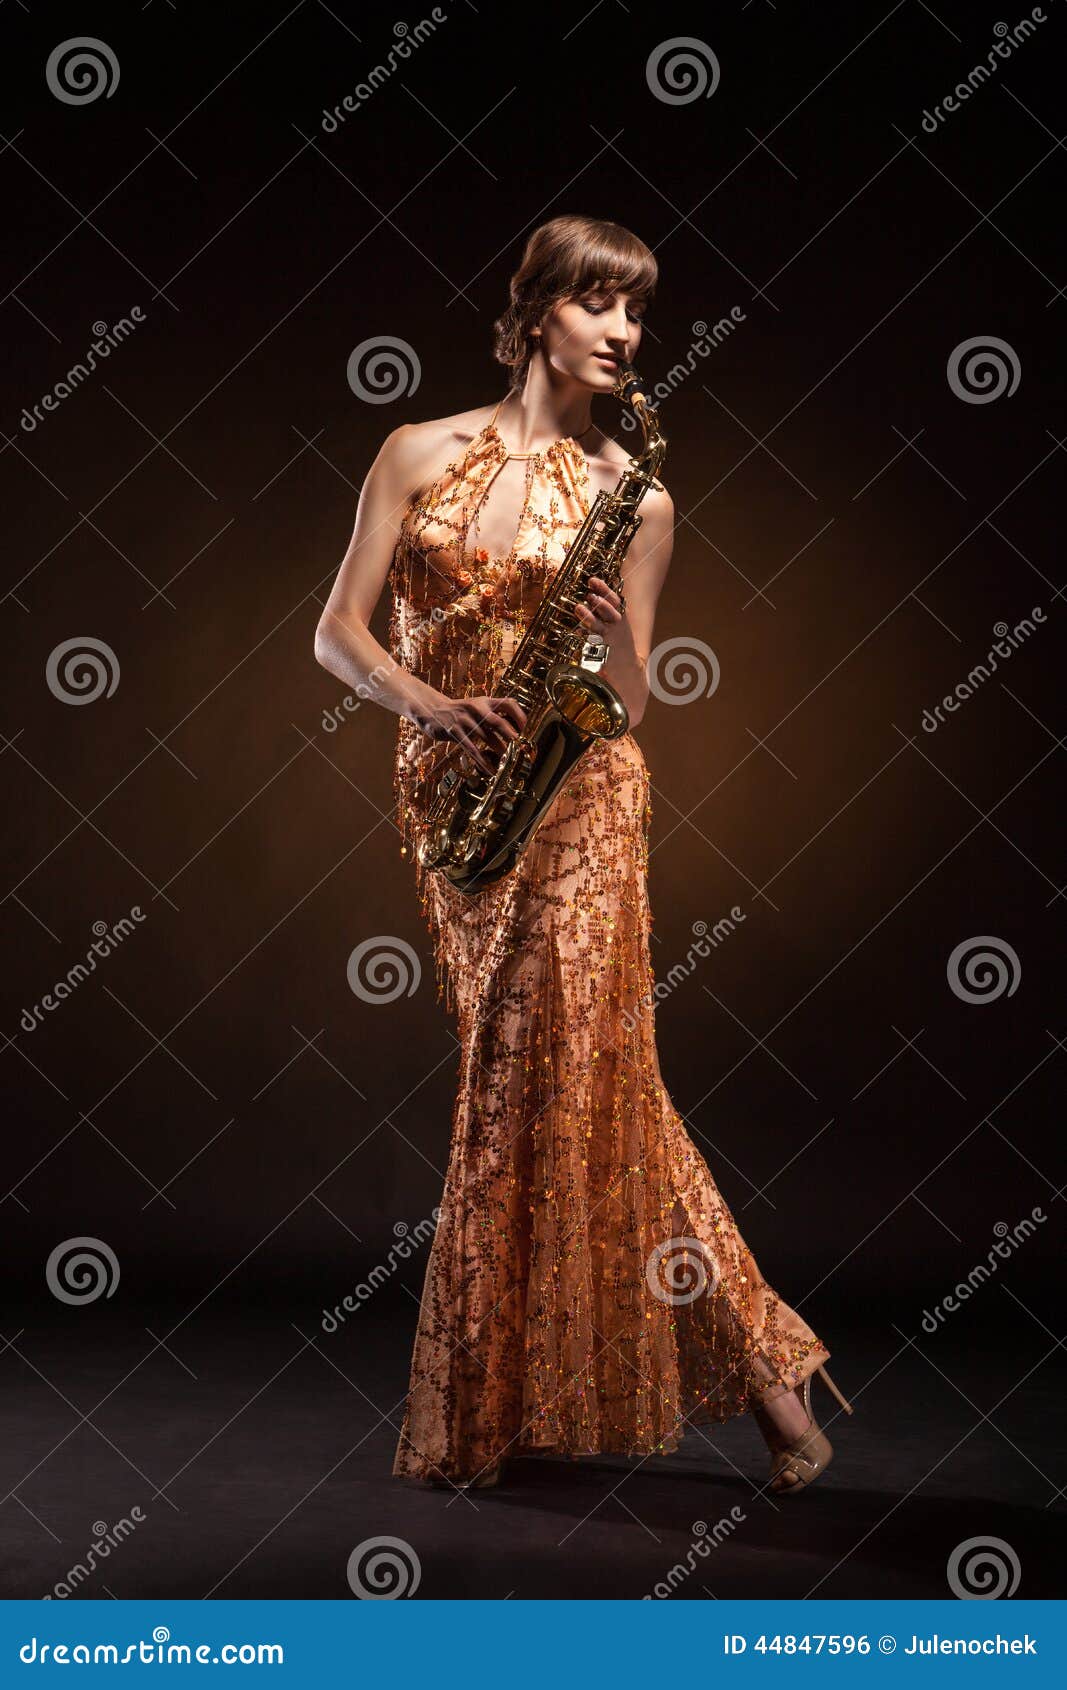 Jazz music. Portrait of a sexual young woman posing with 